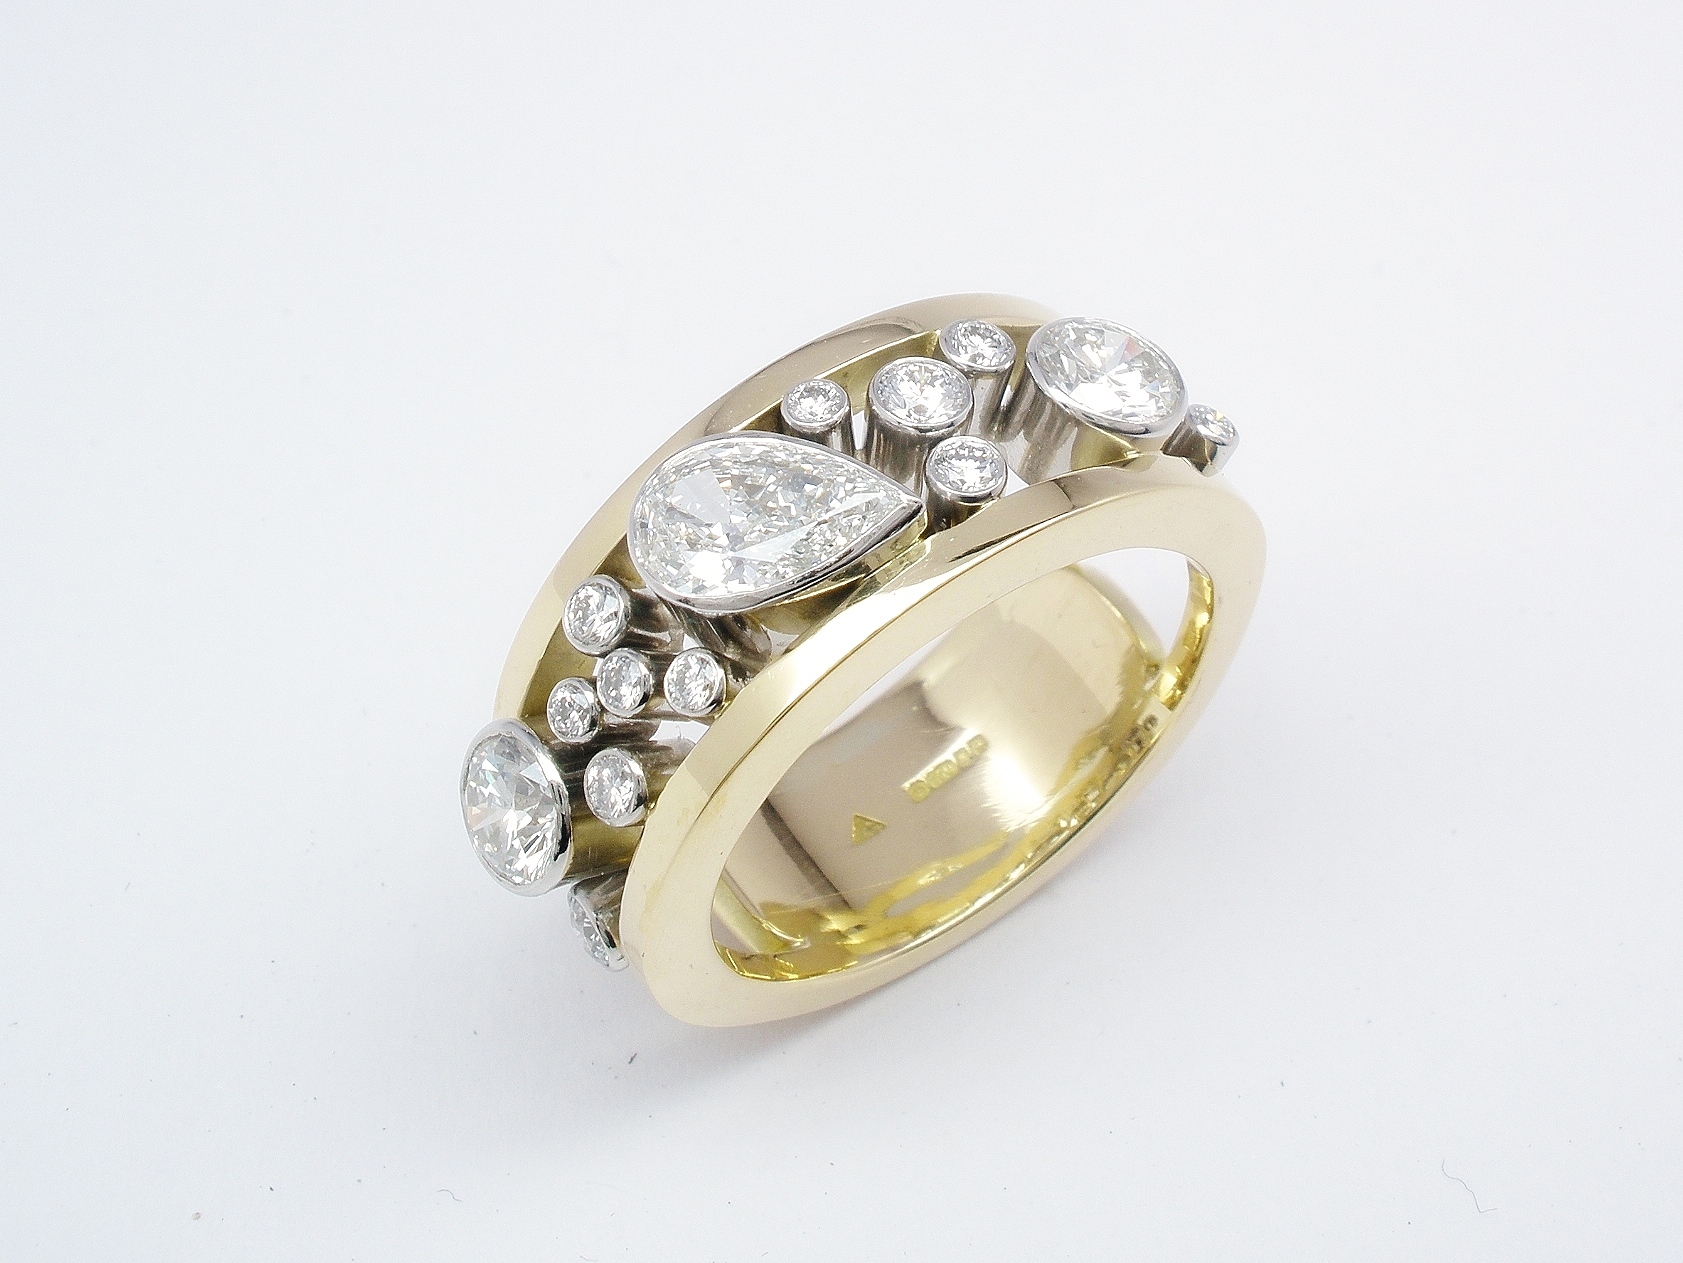 An 18 stone rub-over set pear shaped diamond and round brilliant cut diamond ring mounted in platinum & 18ct. yellow gold.